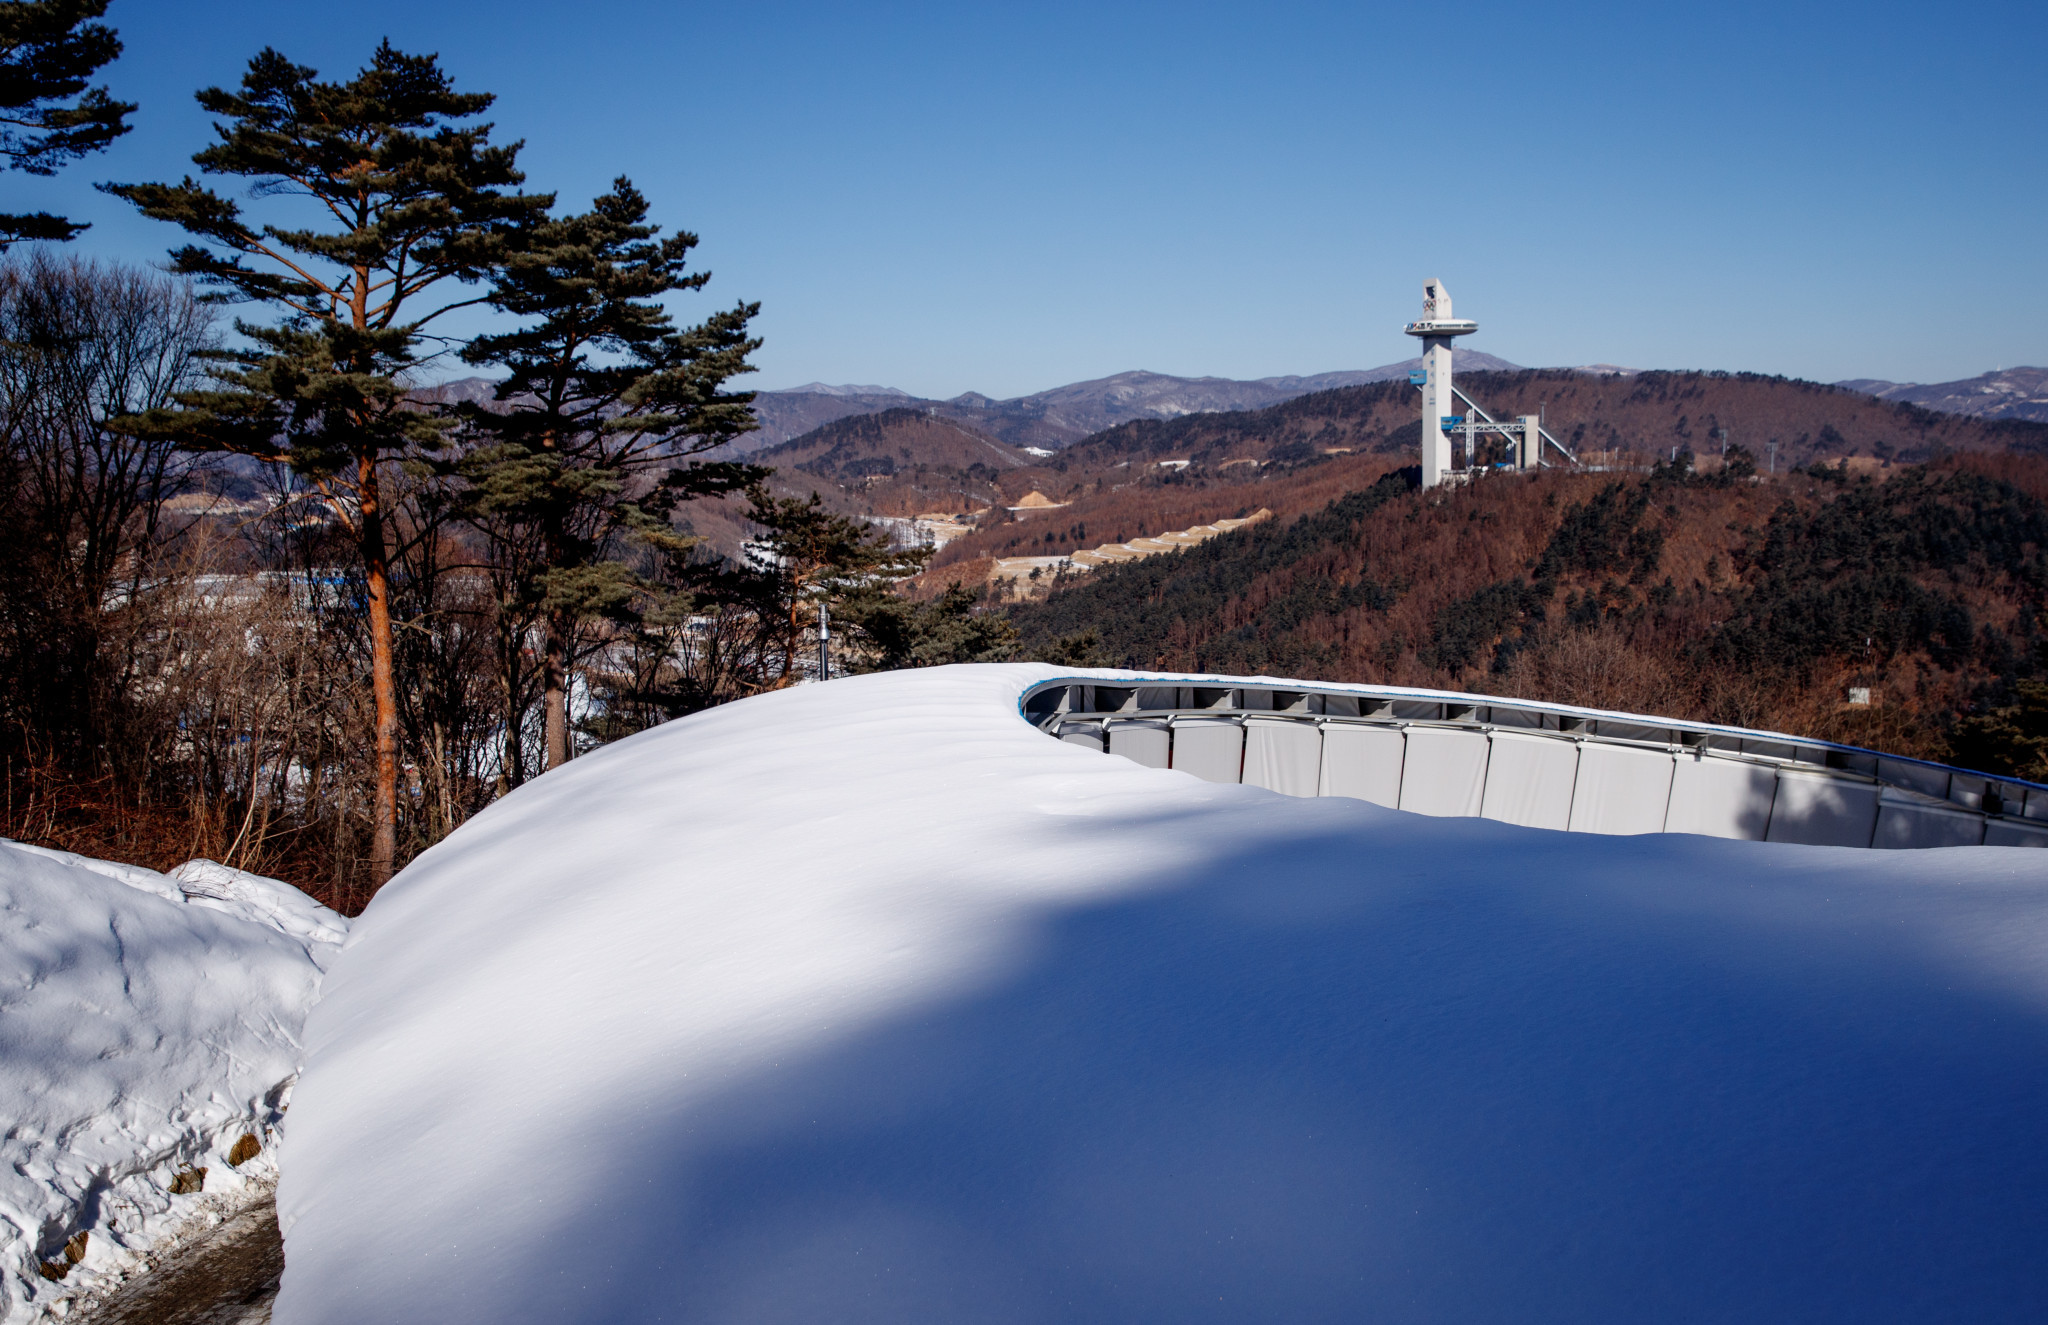 The Olympic Sliding Centre with the ski jumping tower in the background ©Getty Images